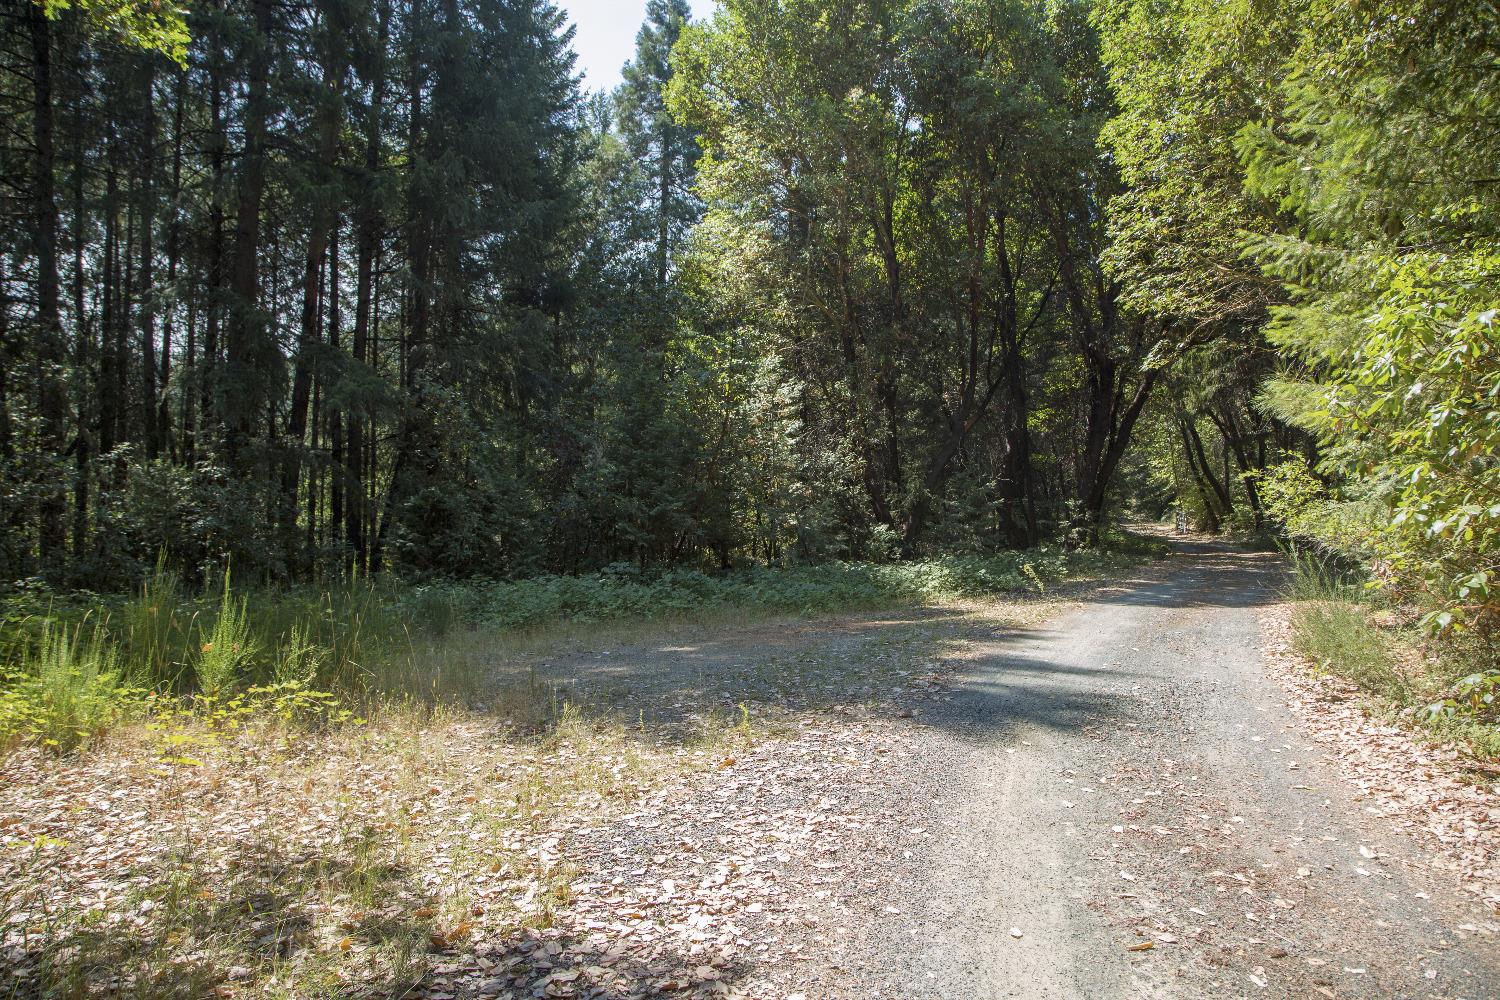 Build your dream home on this beautifully treed 20 acres. With a remote feel you're only 3.2 miles from town.This very private parcel has a leveled and cleared building site, with other choices of potential sites and local views. Loaded with mature and majestic Oak, Pine and Madrone. Plenty of nearby recreational opportunities include the American River, Stumpy Meadows, Union Valley, French Meadows, Loon, Ice House and Hell Hole Lakes. Bring your imagination and make this property yours while enjoying abundant wildlife and beautiful surroundings.